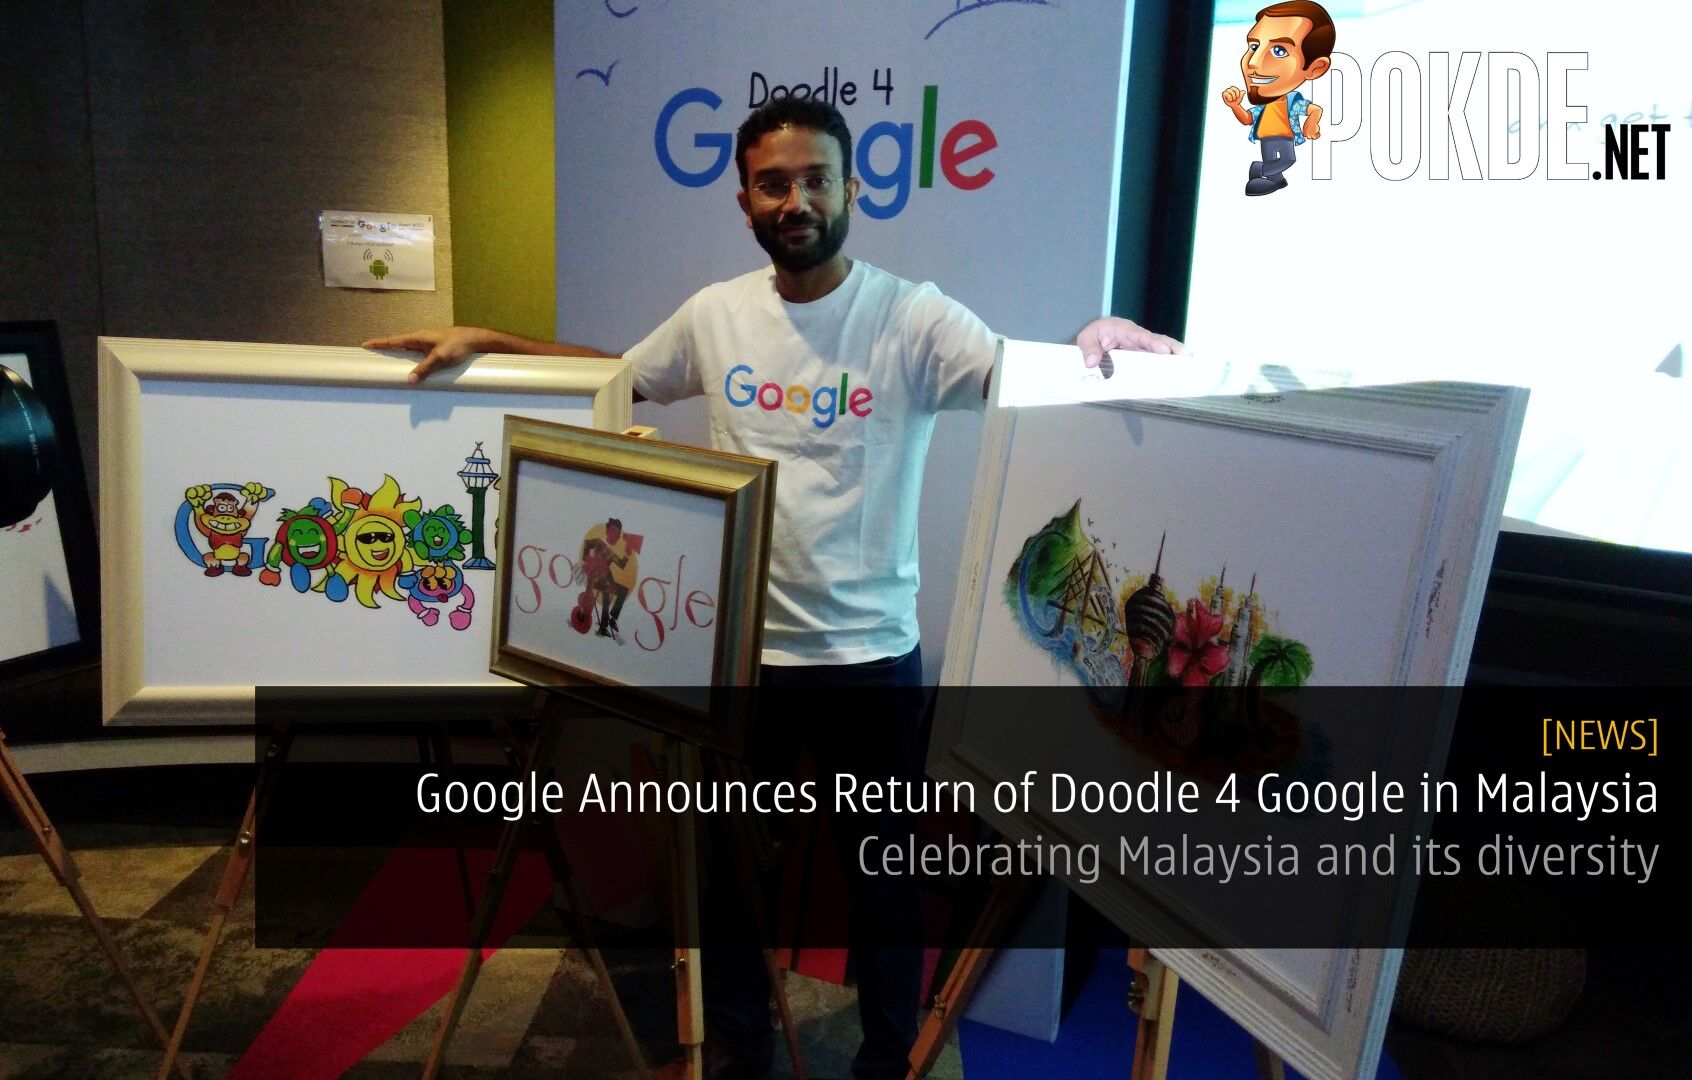 Google Announces Return of Doodle 4 Google in Malaysia - Celebrating Malaysia and its diversity 29